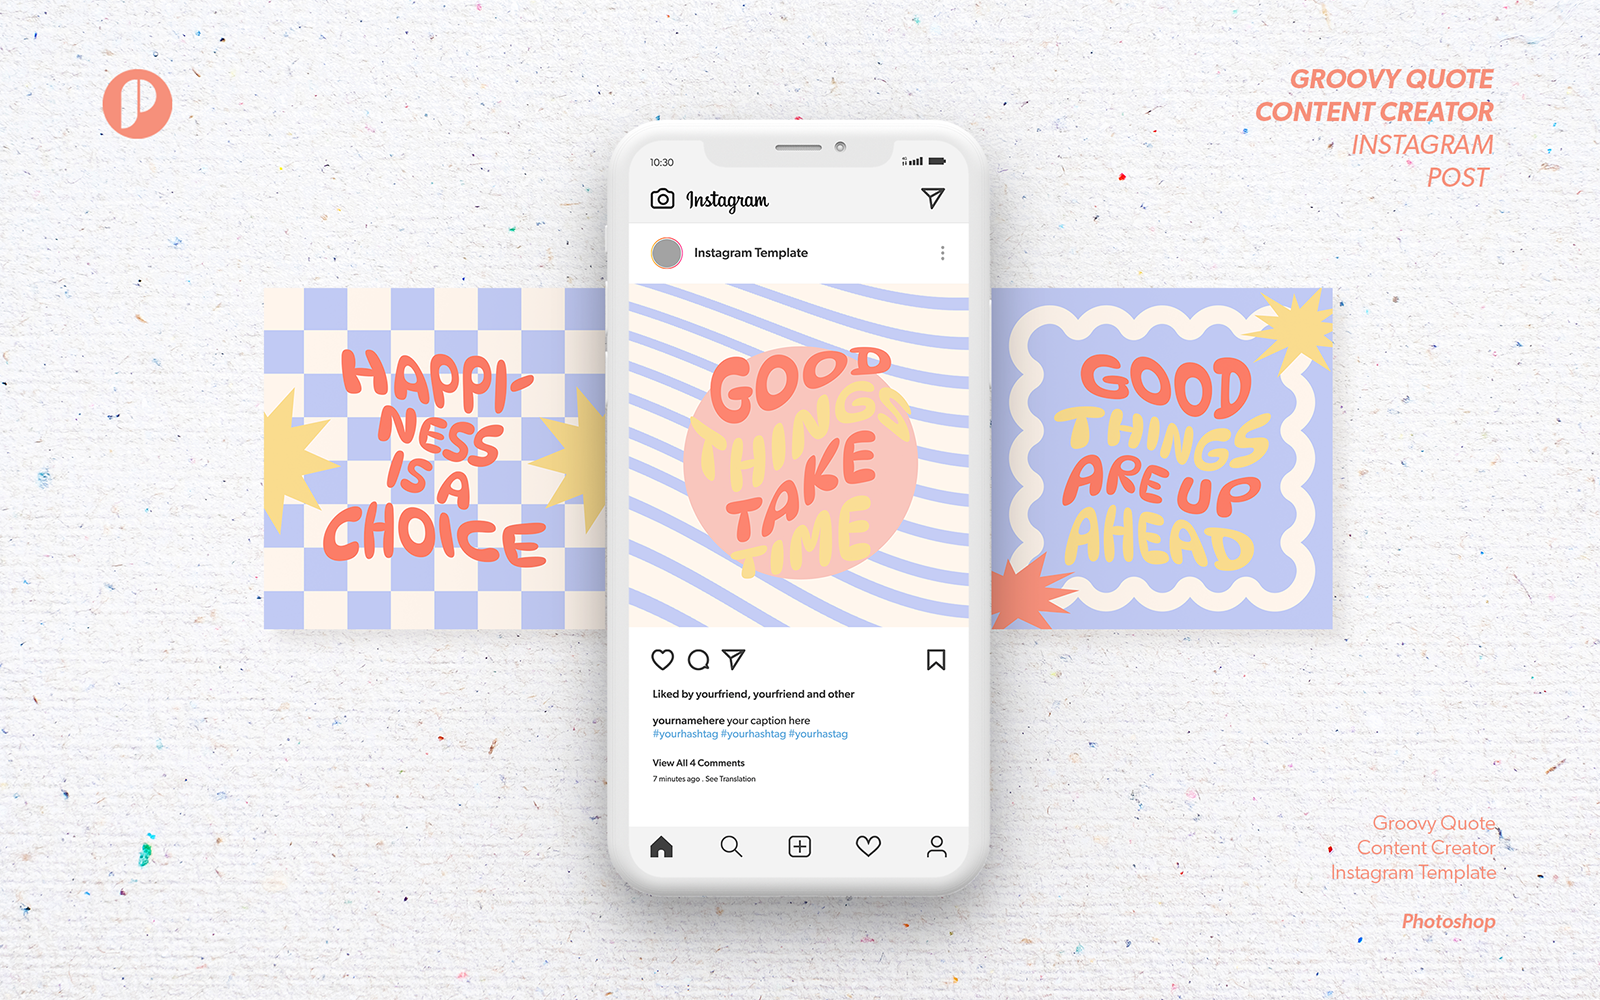 Colorful groovy quote content creator instagram template